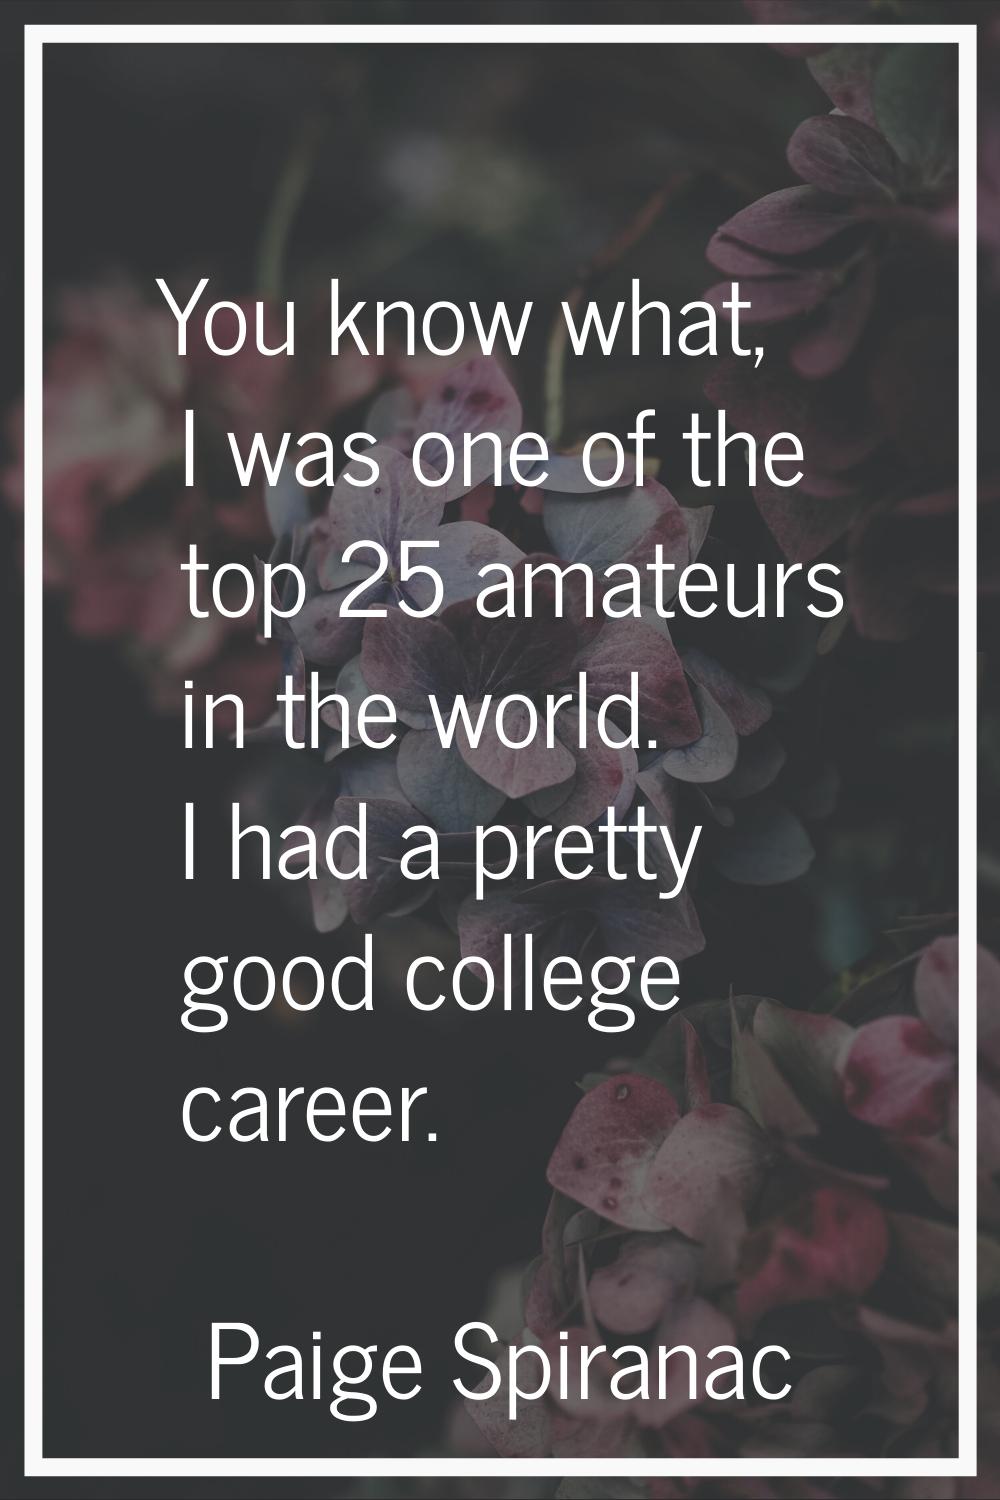 You know what, I was one of the top 25 amateurs in the world. I had a pretty good college career.